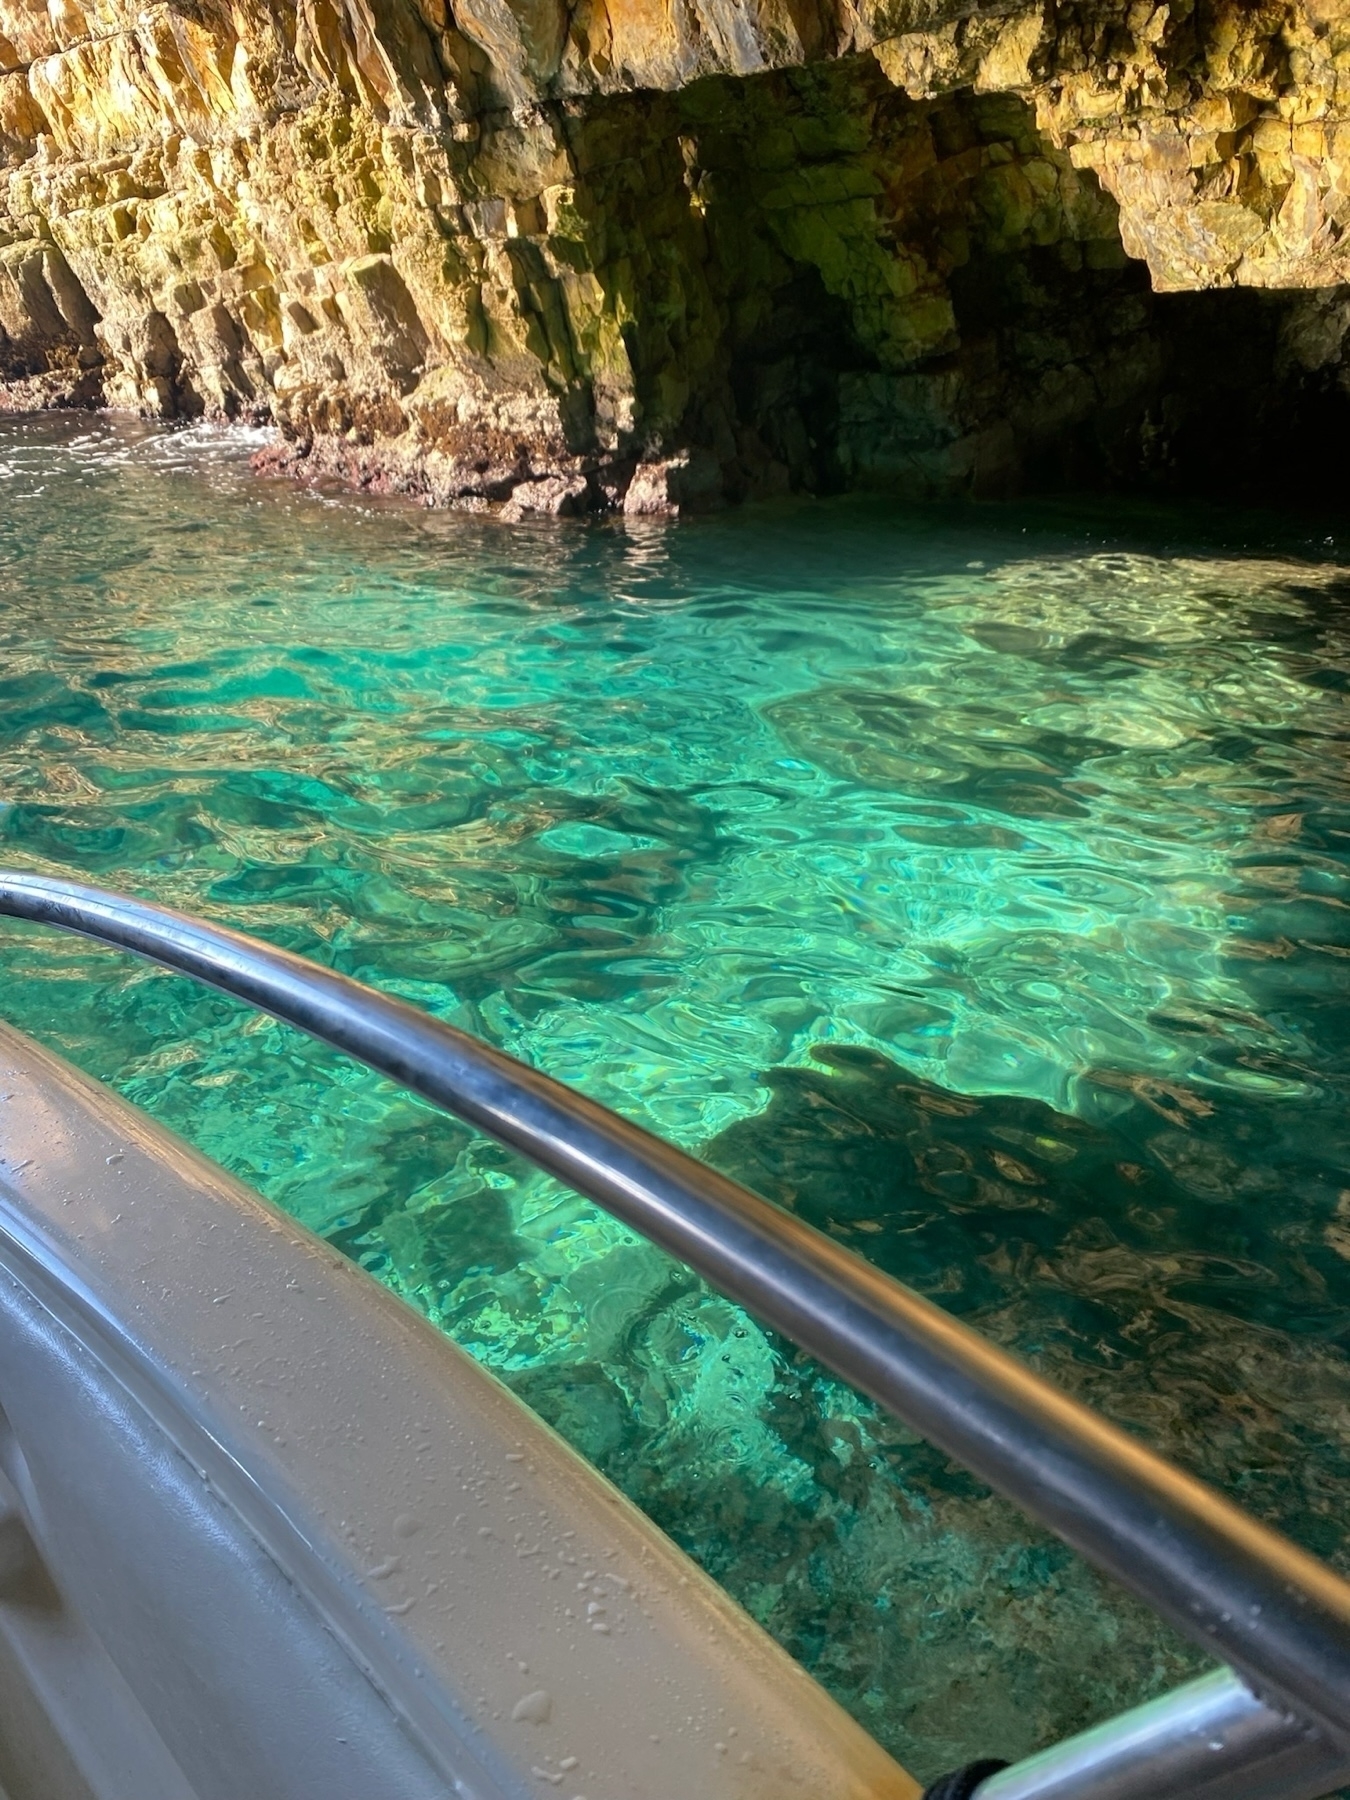 A small boat navigating close to a rocky cliff with a shallow cave. The water is clear and turquoise, reflecting the surrounding rocks. The boat’s railing and part of the hull are visible in the foreground.